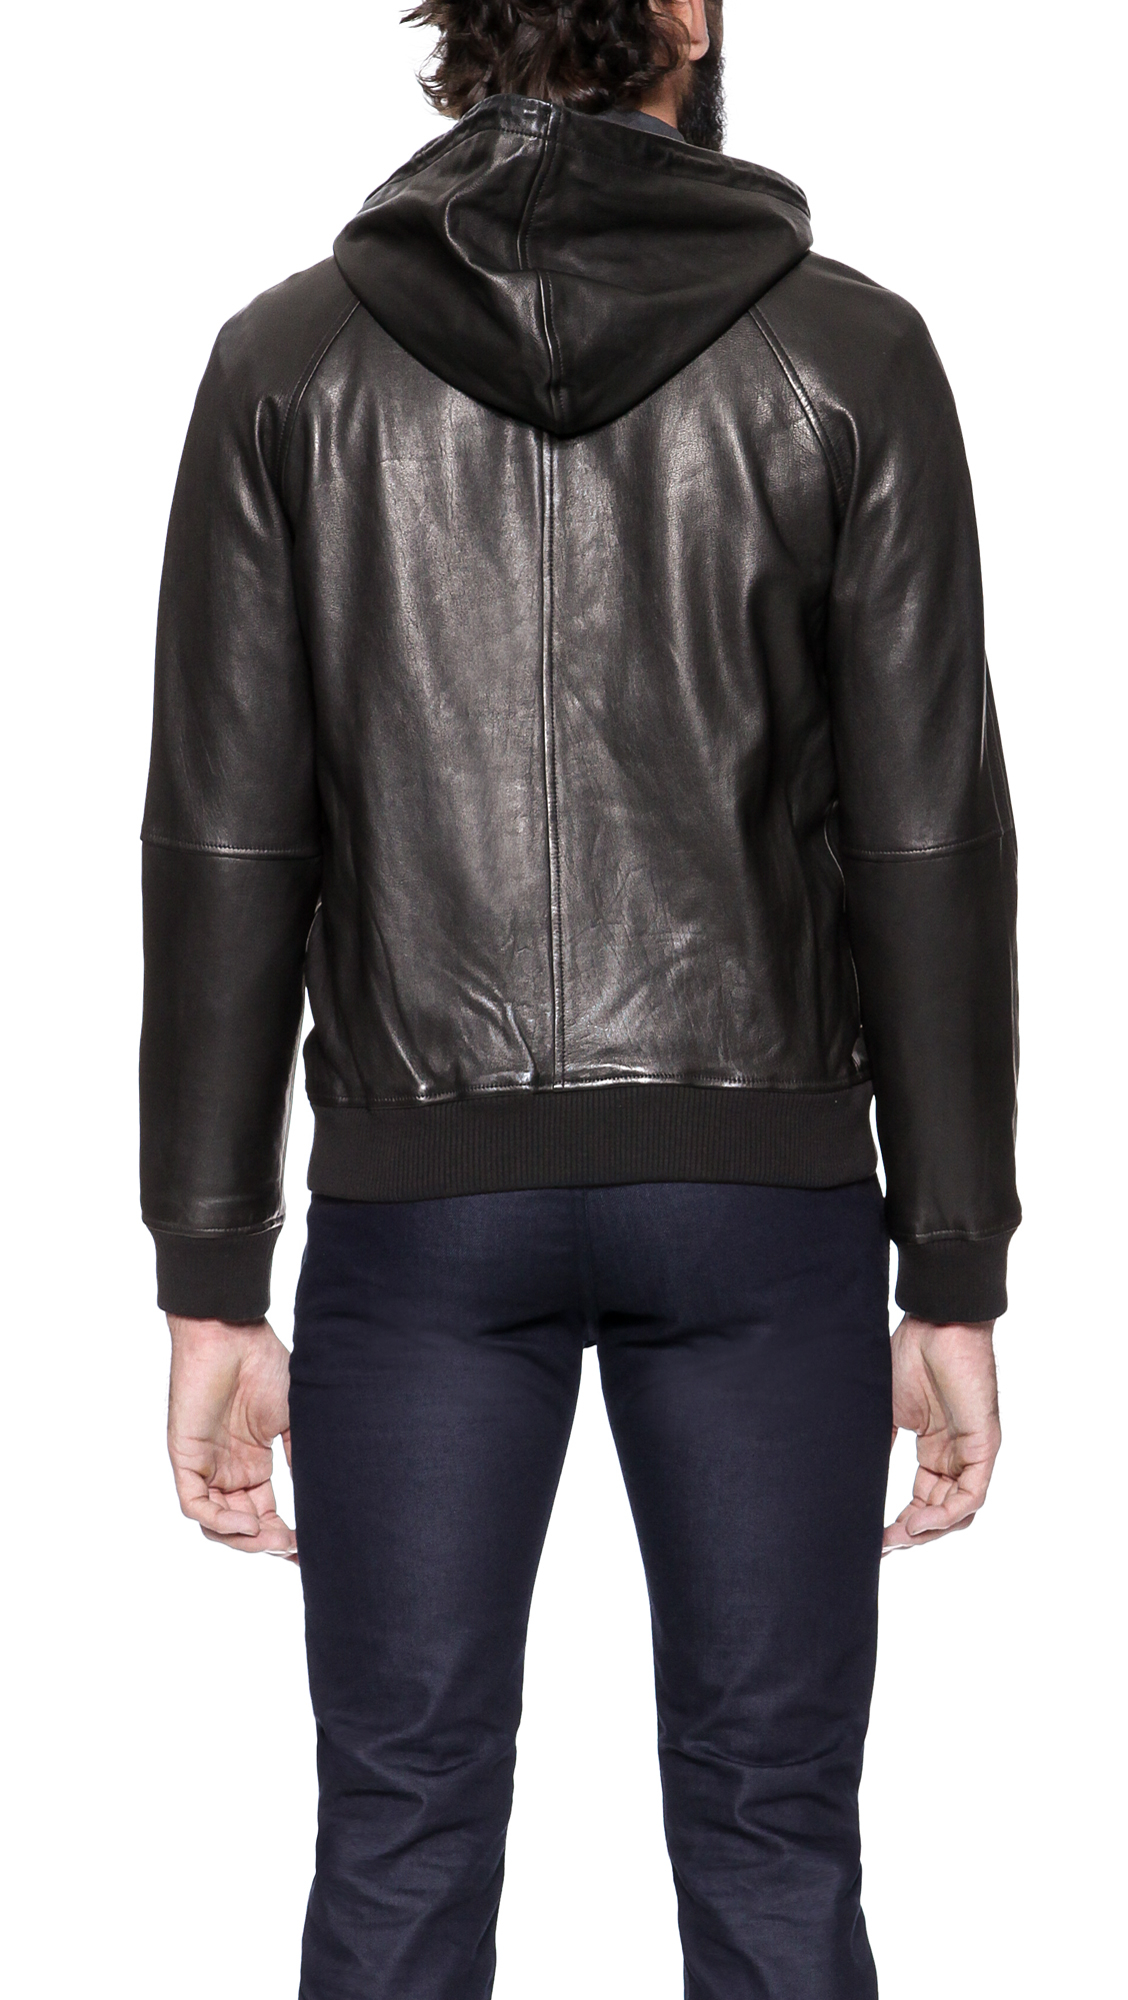 Marc By Marc Jacobs Leather Hooded Jacket in Black for Men - Lyst